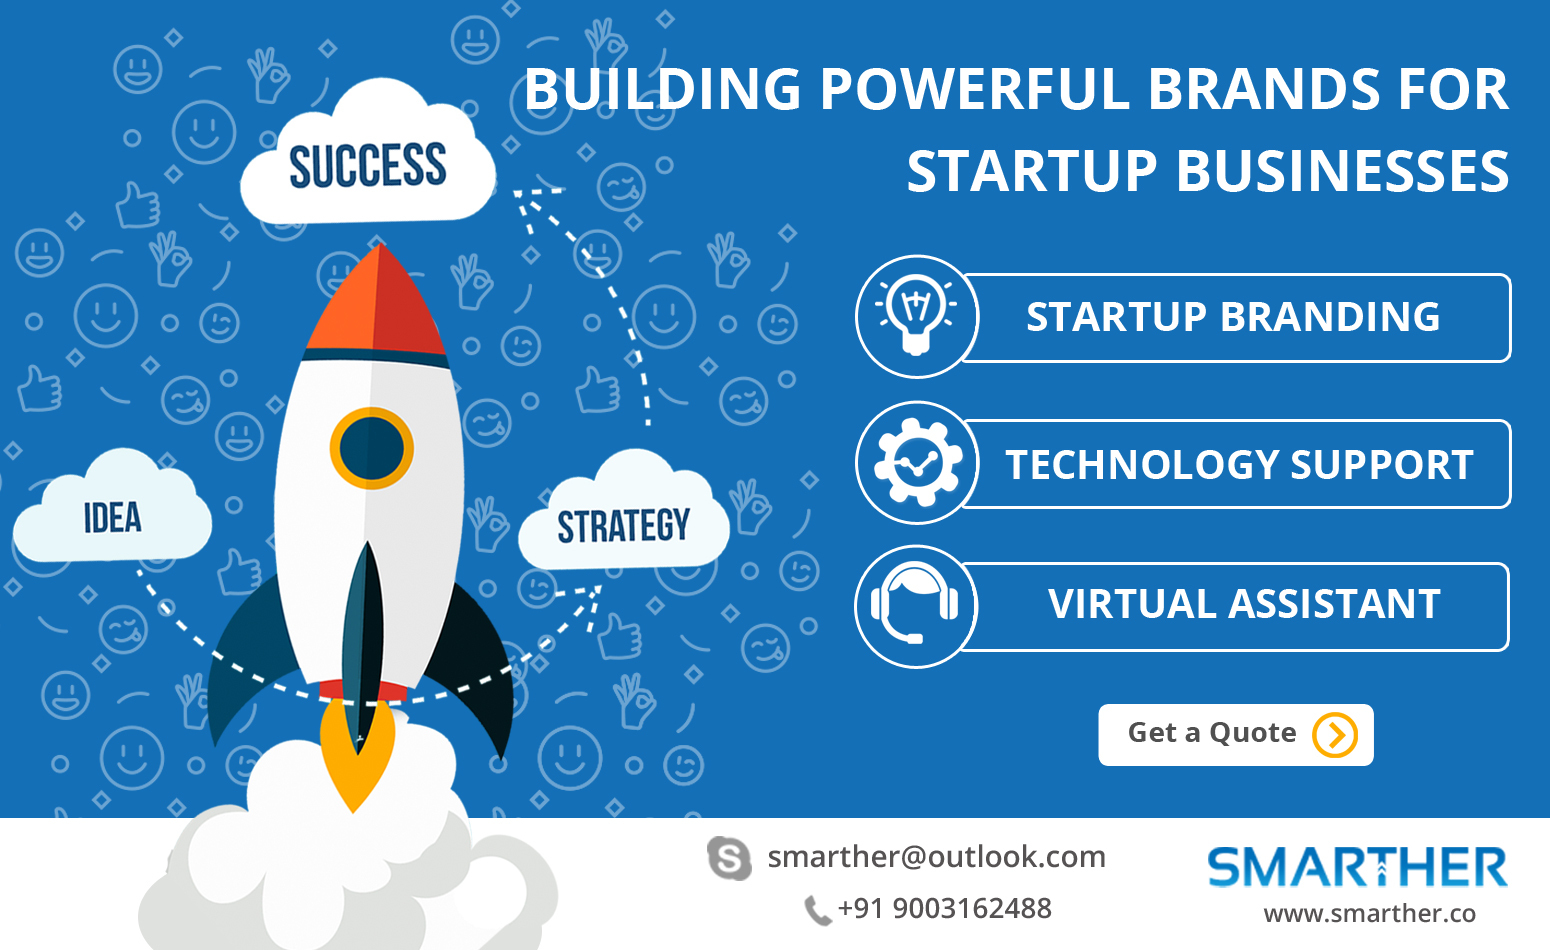 BUILDING POWERFUL BRANDS FOR
DOD iN PV: VE E39 3
ENC) ETT

oO Pure TECHNOLOGY SUPPORT
So, ’ VIRTUAL ASSISTANT

Get a Quote

S smarther@outlook.com SMARTH E R

€, +91 9003162488 www.smarther.co

I